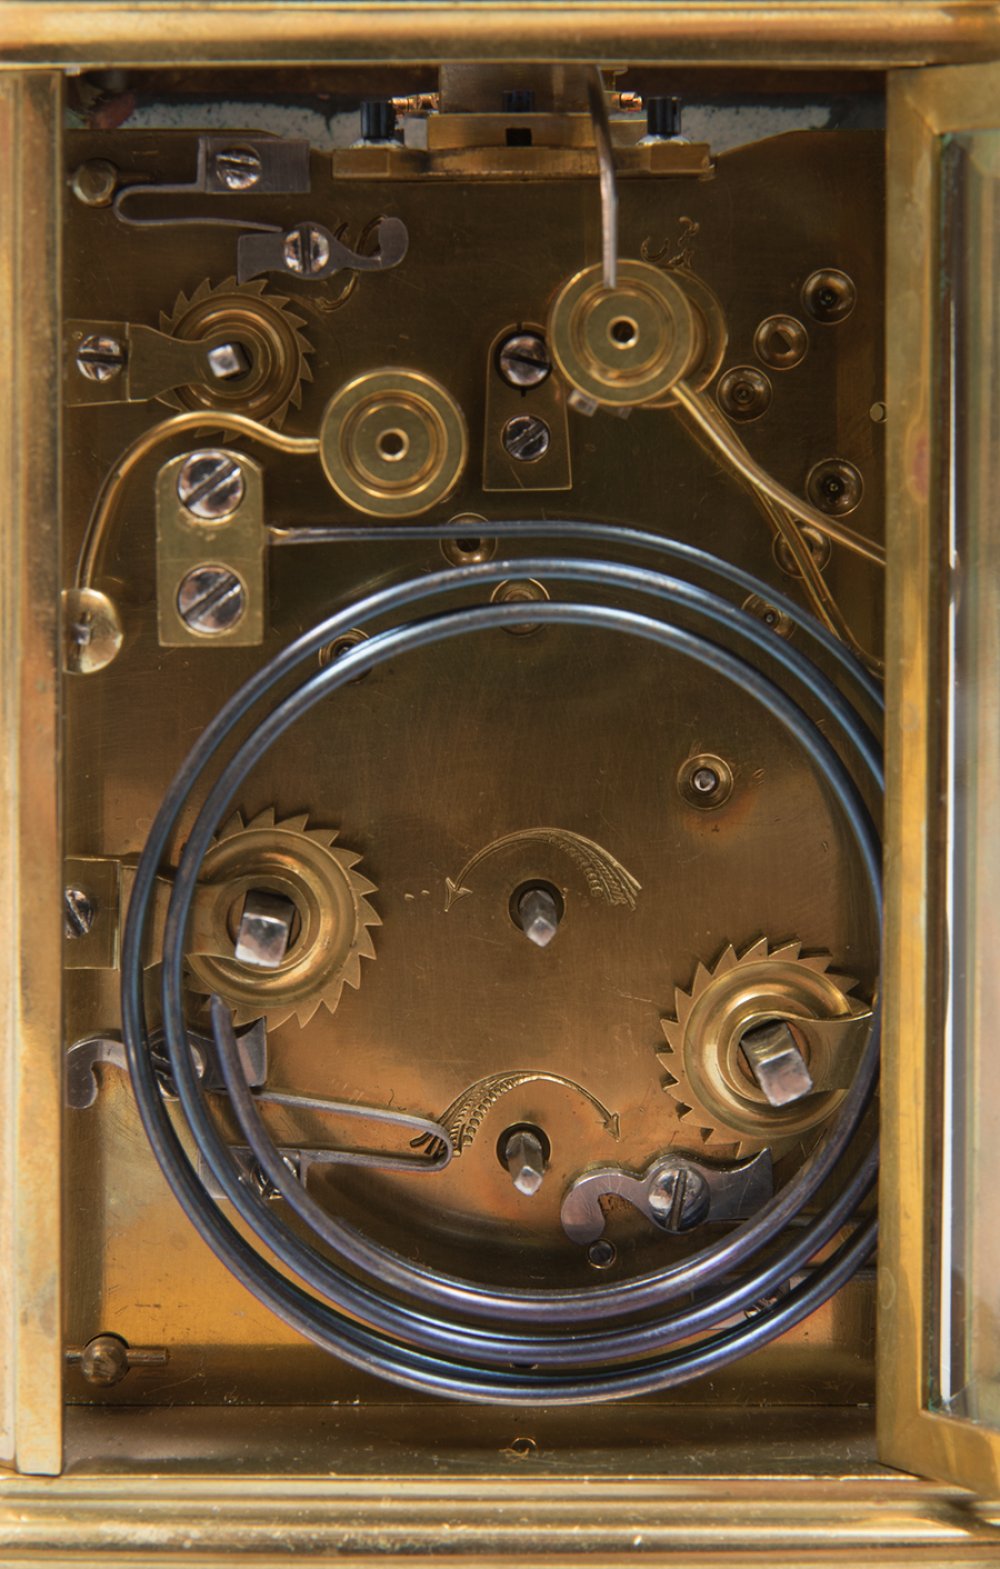 Travel clock; late 19th century.Bronze and bevelled glass.No key preserved.Precise set-up. - Image 5 of 6